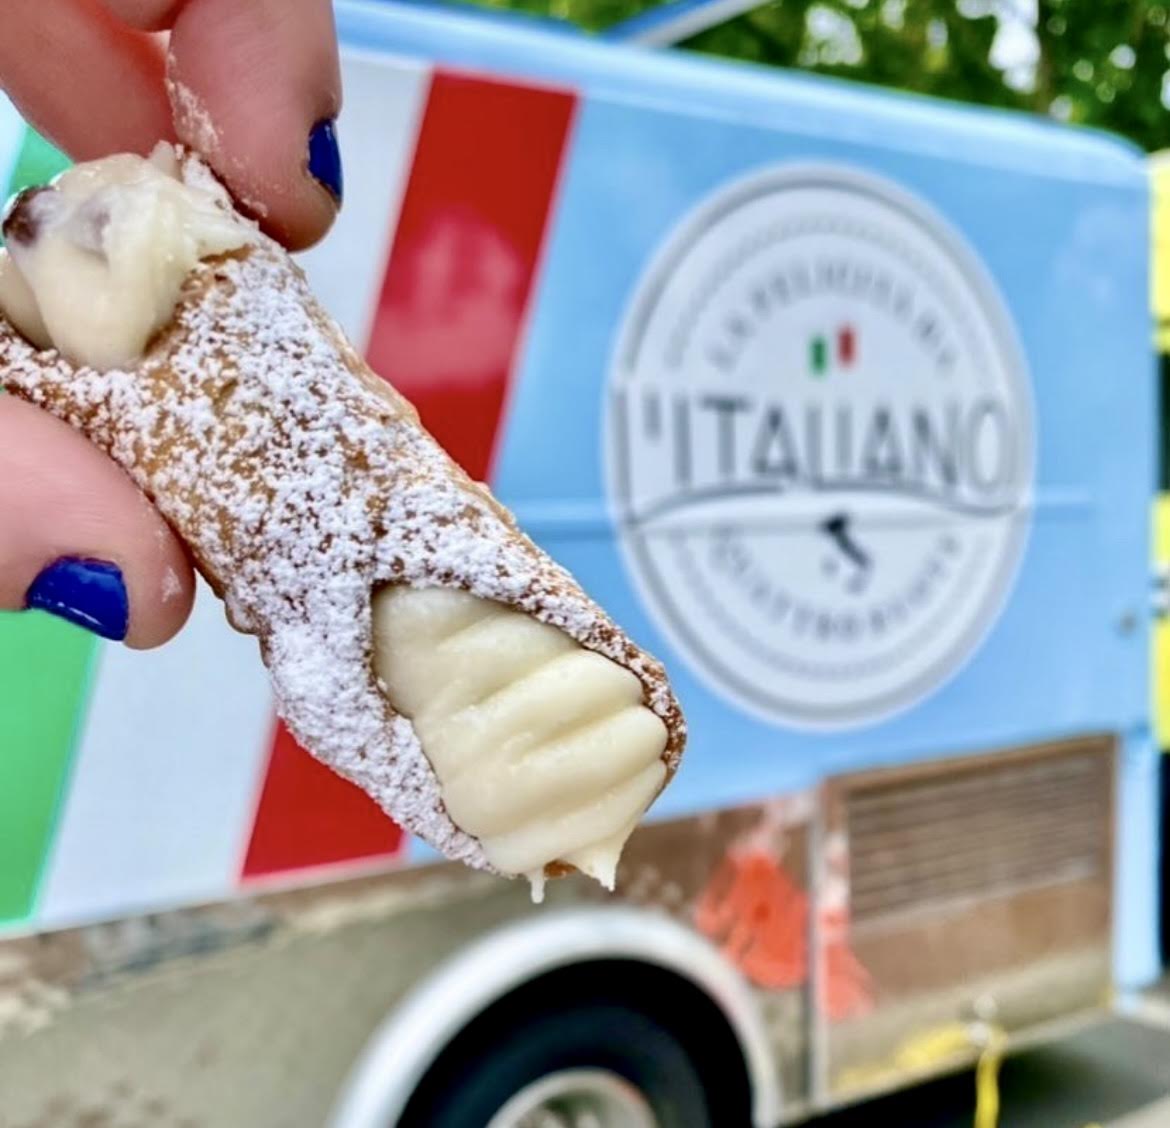 Authentic Italian Food Truck at Plaza East in Bellevue this Wednesday